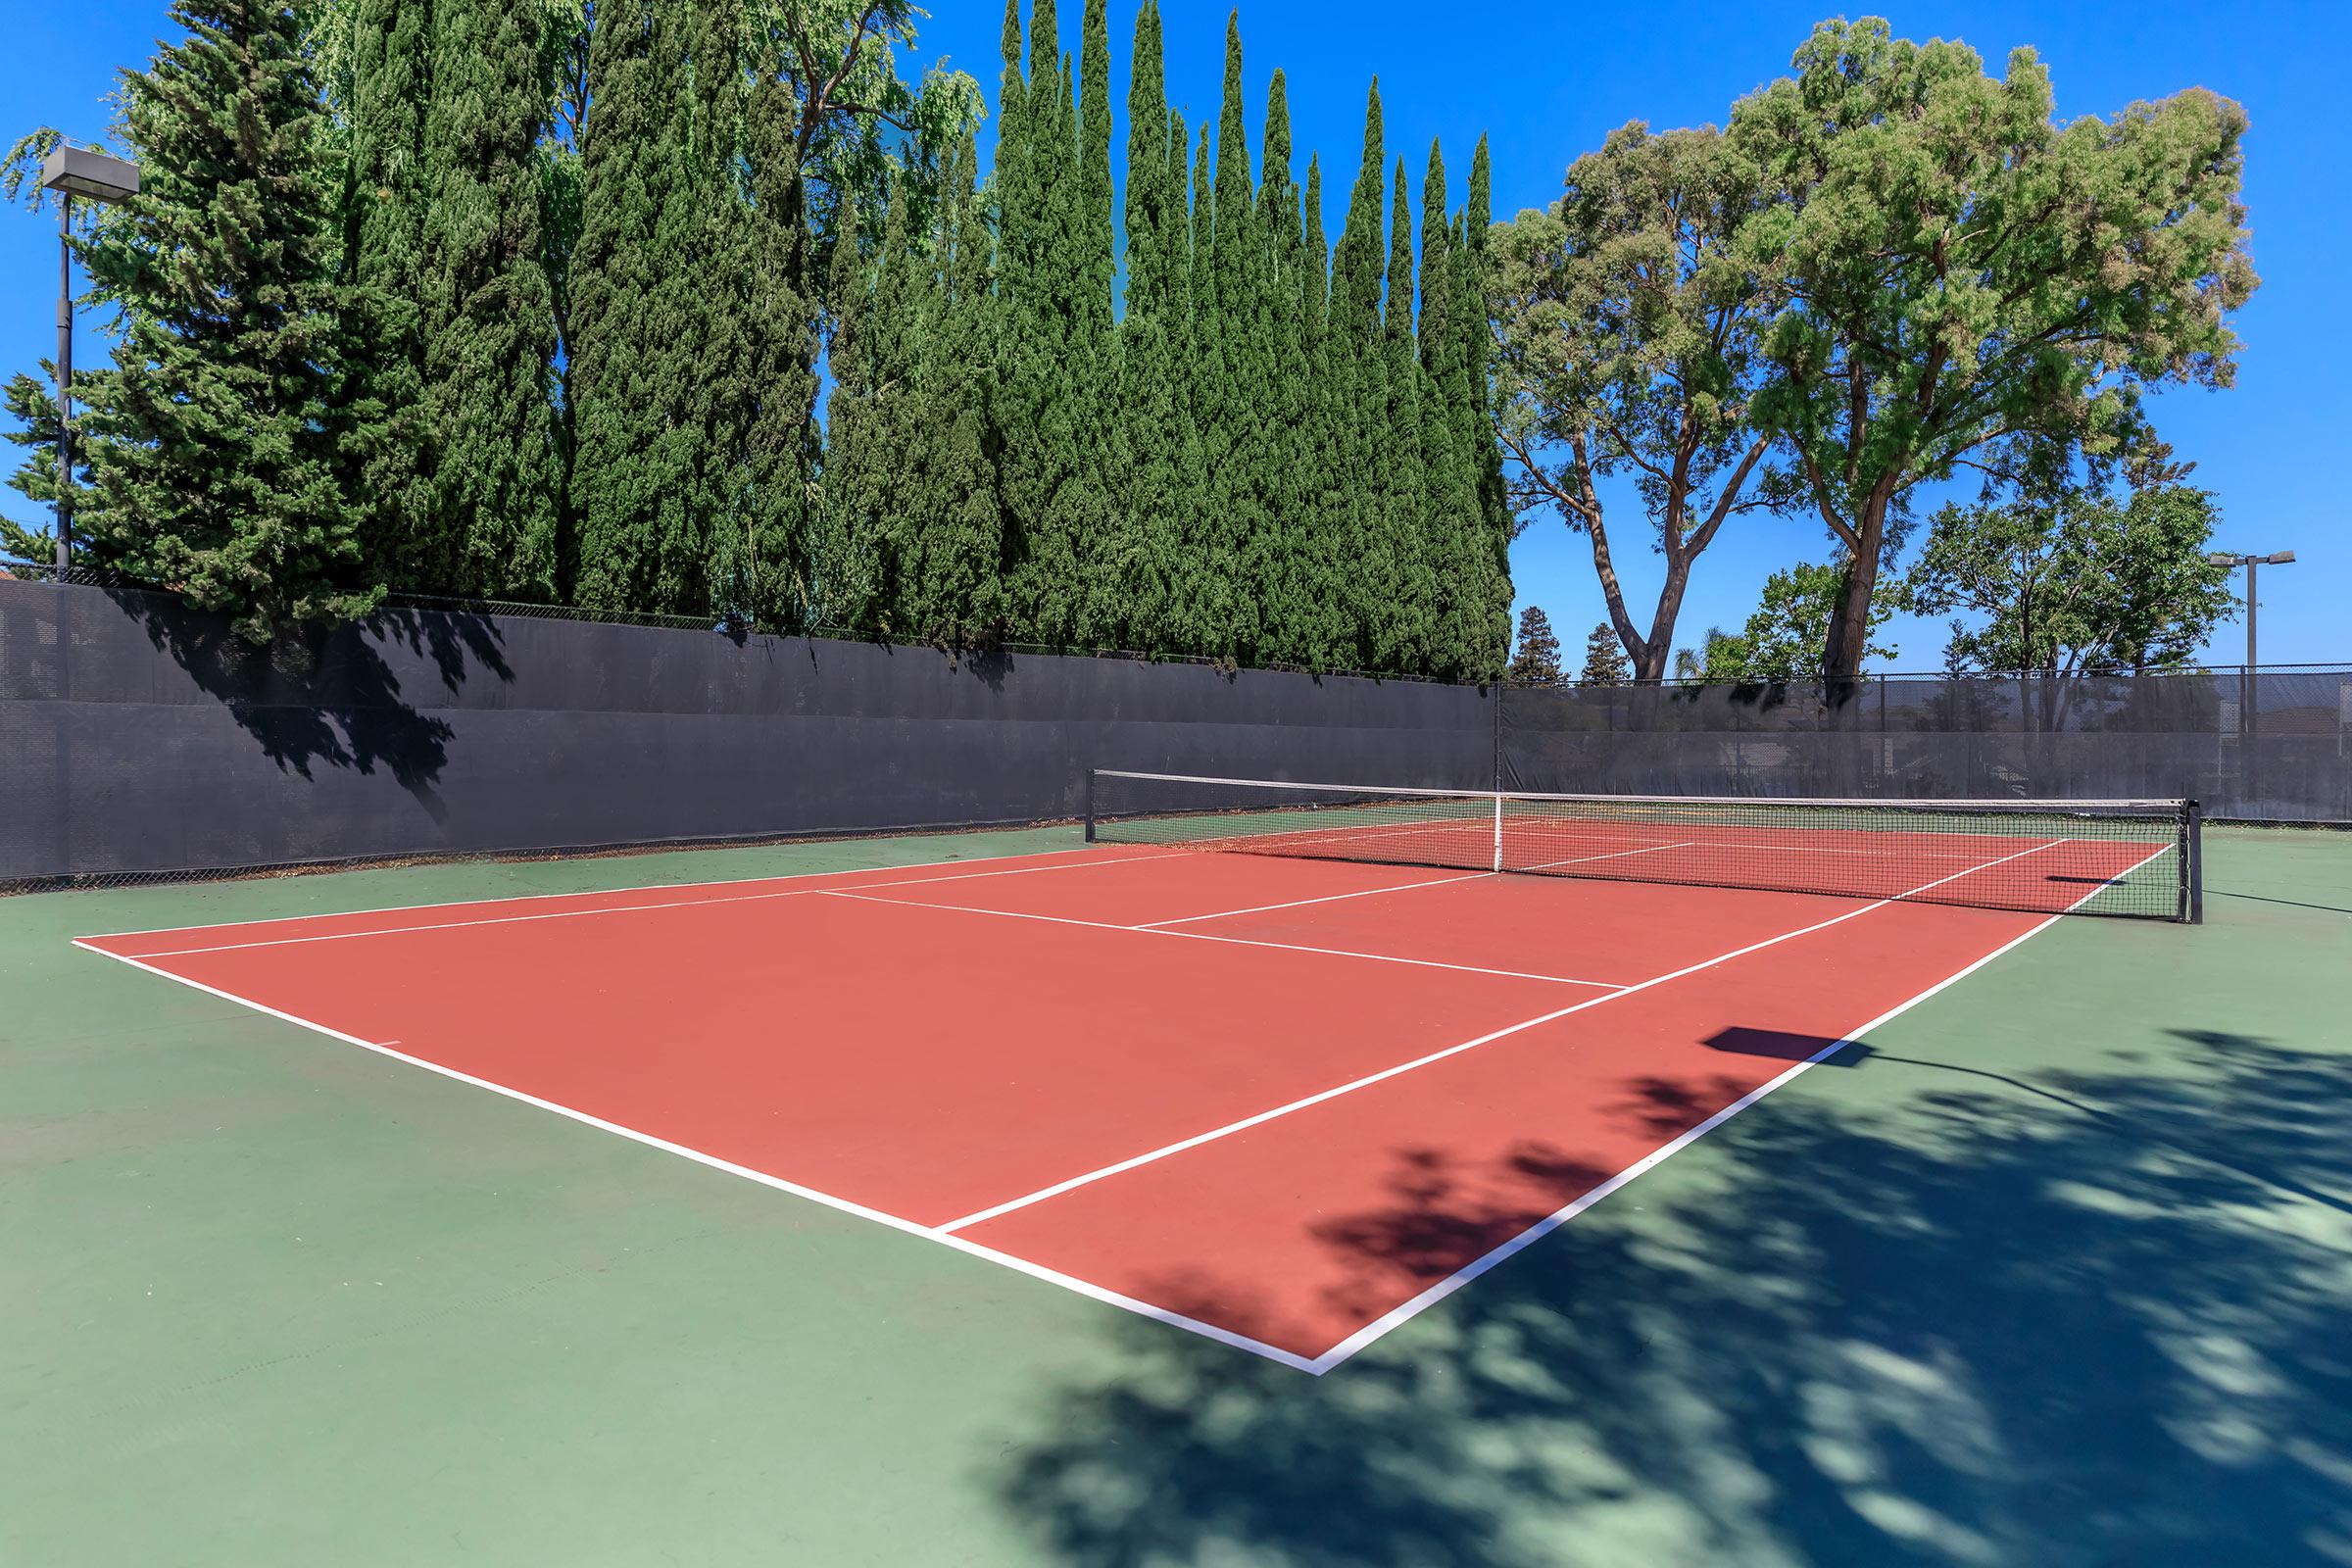 CHALLENGE NEIGHBORS TO A GAME OF TENNIS